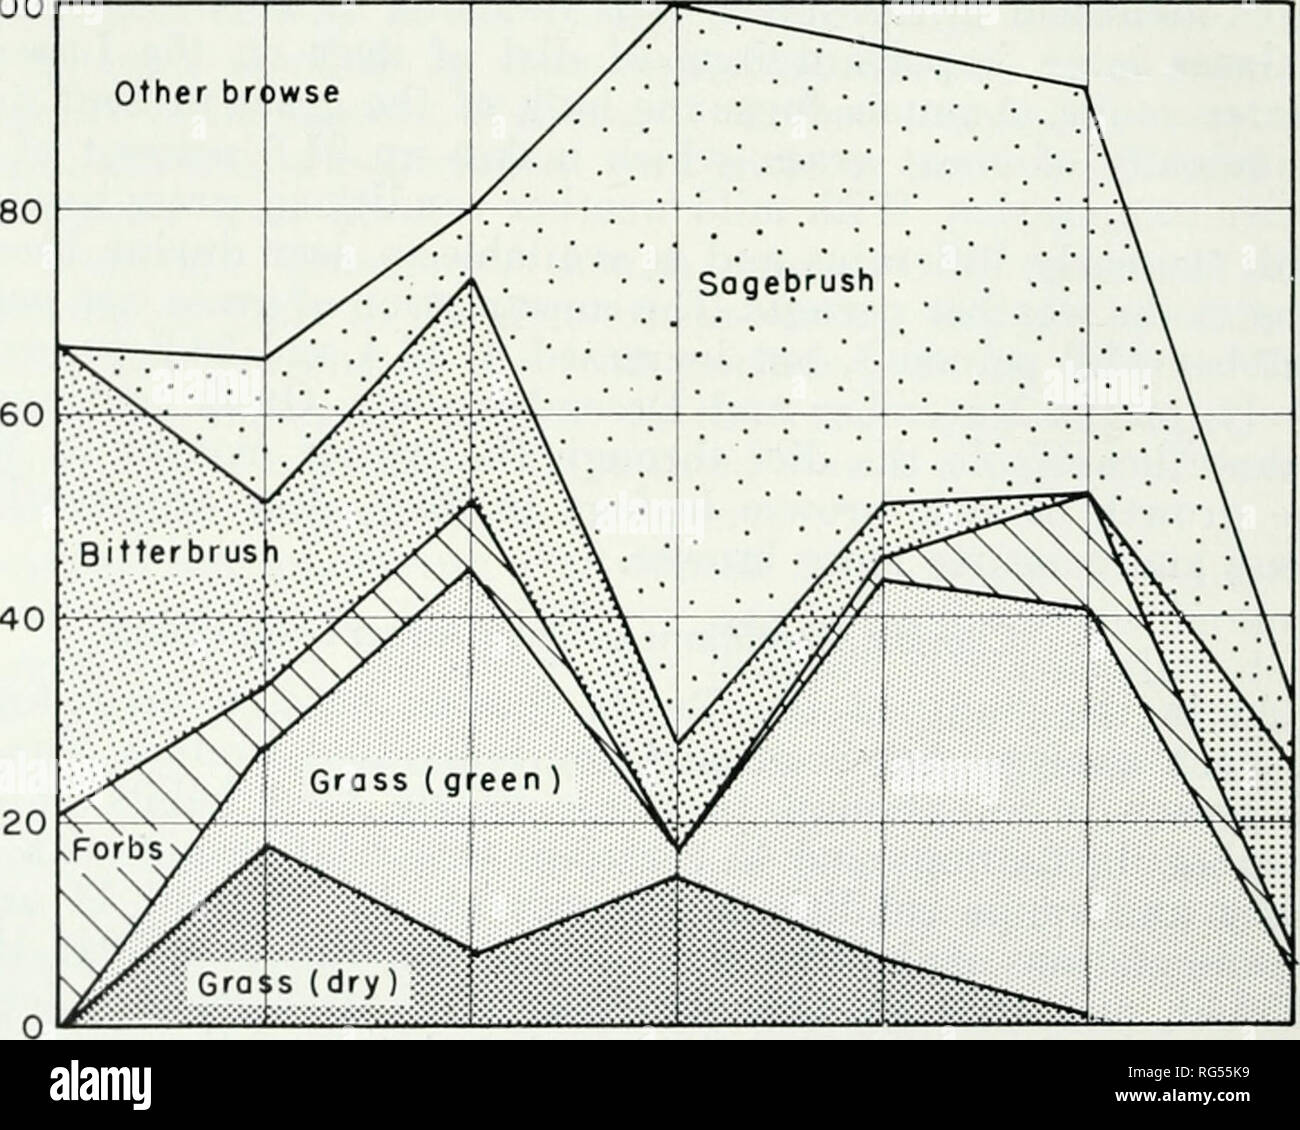 . California fish and game. Fisheries -- California; Game and game-birds -- California; Fishes -- California; Animal Population Groups; Pêches; Gibier; Poissons. NO. jam Specimens 2 FIGURE 12. Graphic representation of the food habits of the Lassen-Washoe deer herd in the winter of 1949-50. 100 UJ 5 UJ O &lt; Z UJ o or ui a.. No. OCT NOV. DEC. JAN. FEB. MAR Specimen 10 10 9 6 14 15 APR. FIGURE 13. Graphic representation of the food habits of the Lassen-Washoe deer herd in the winter of 1950-51.. Please note that these images are extracted from scanned page images that may have been digitally e Stock Photo